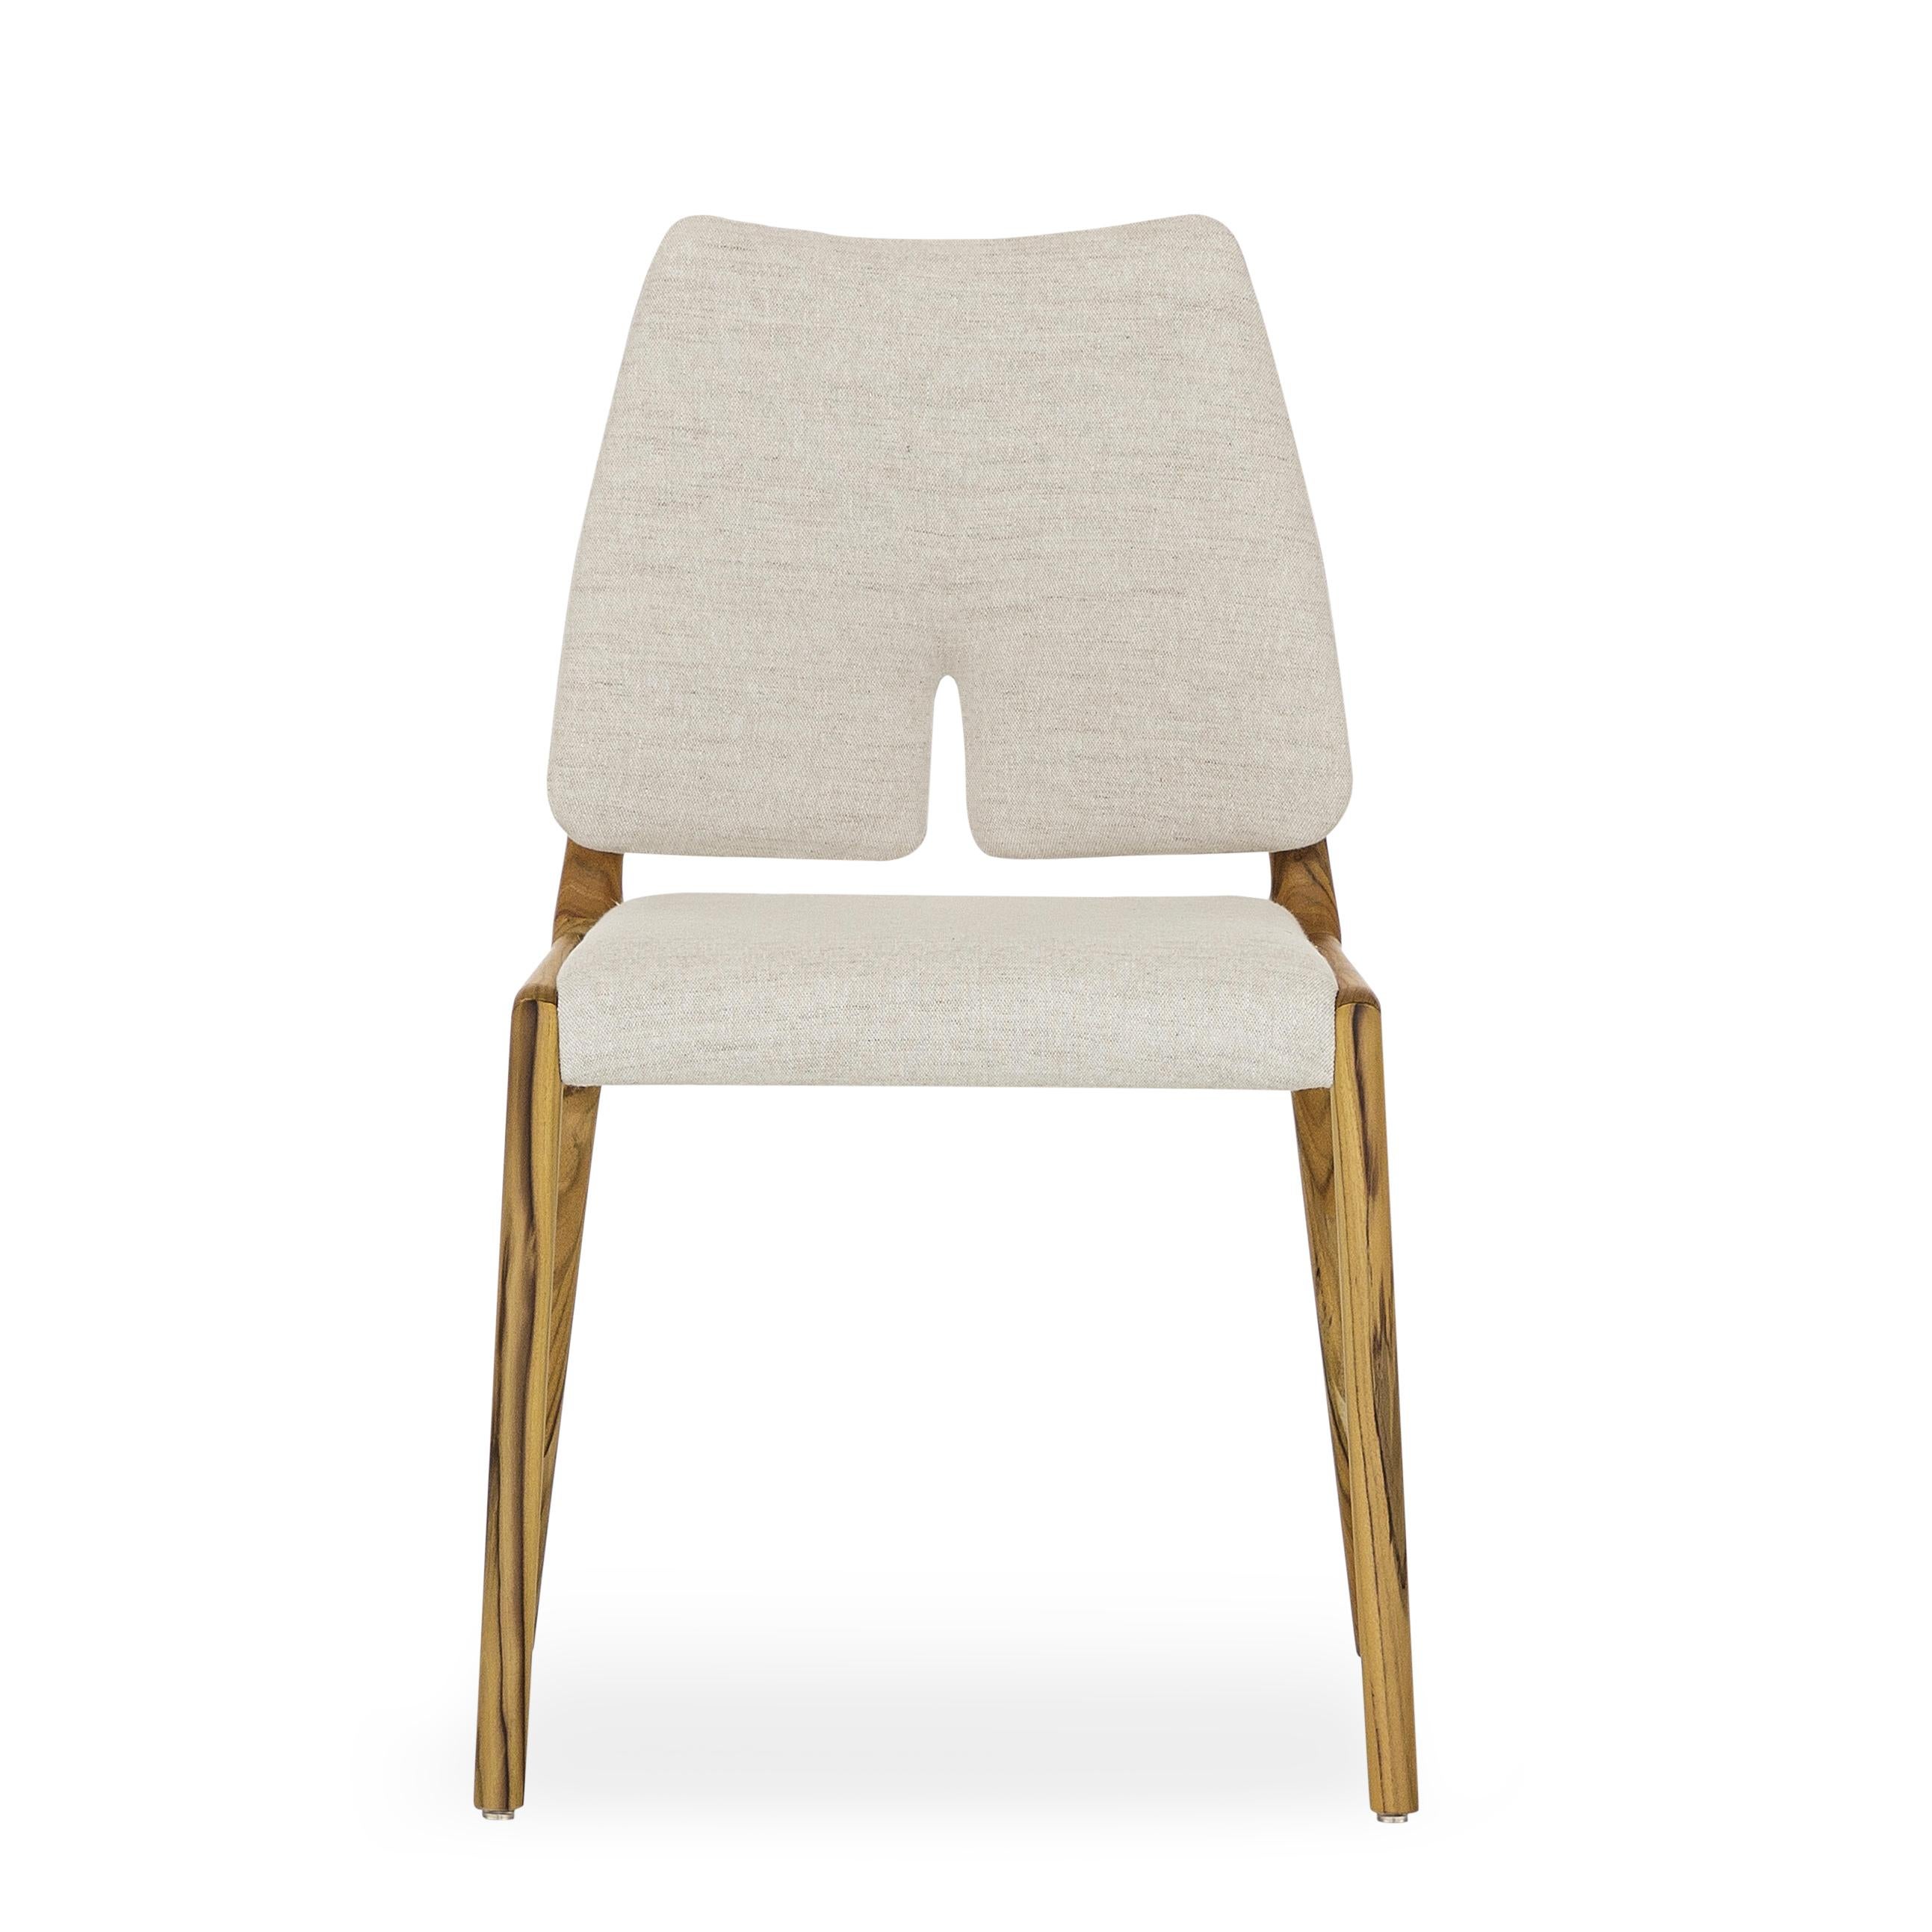 Contemporary Slit Dining Chair in Teak Wood Finish and Light Beige Cotton Fabric, Set of 2 For Sale